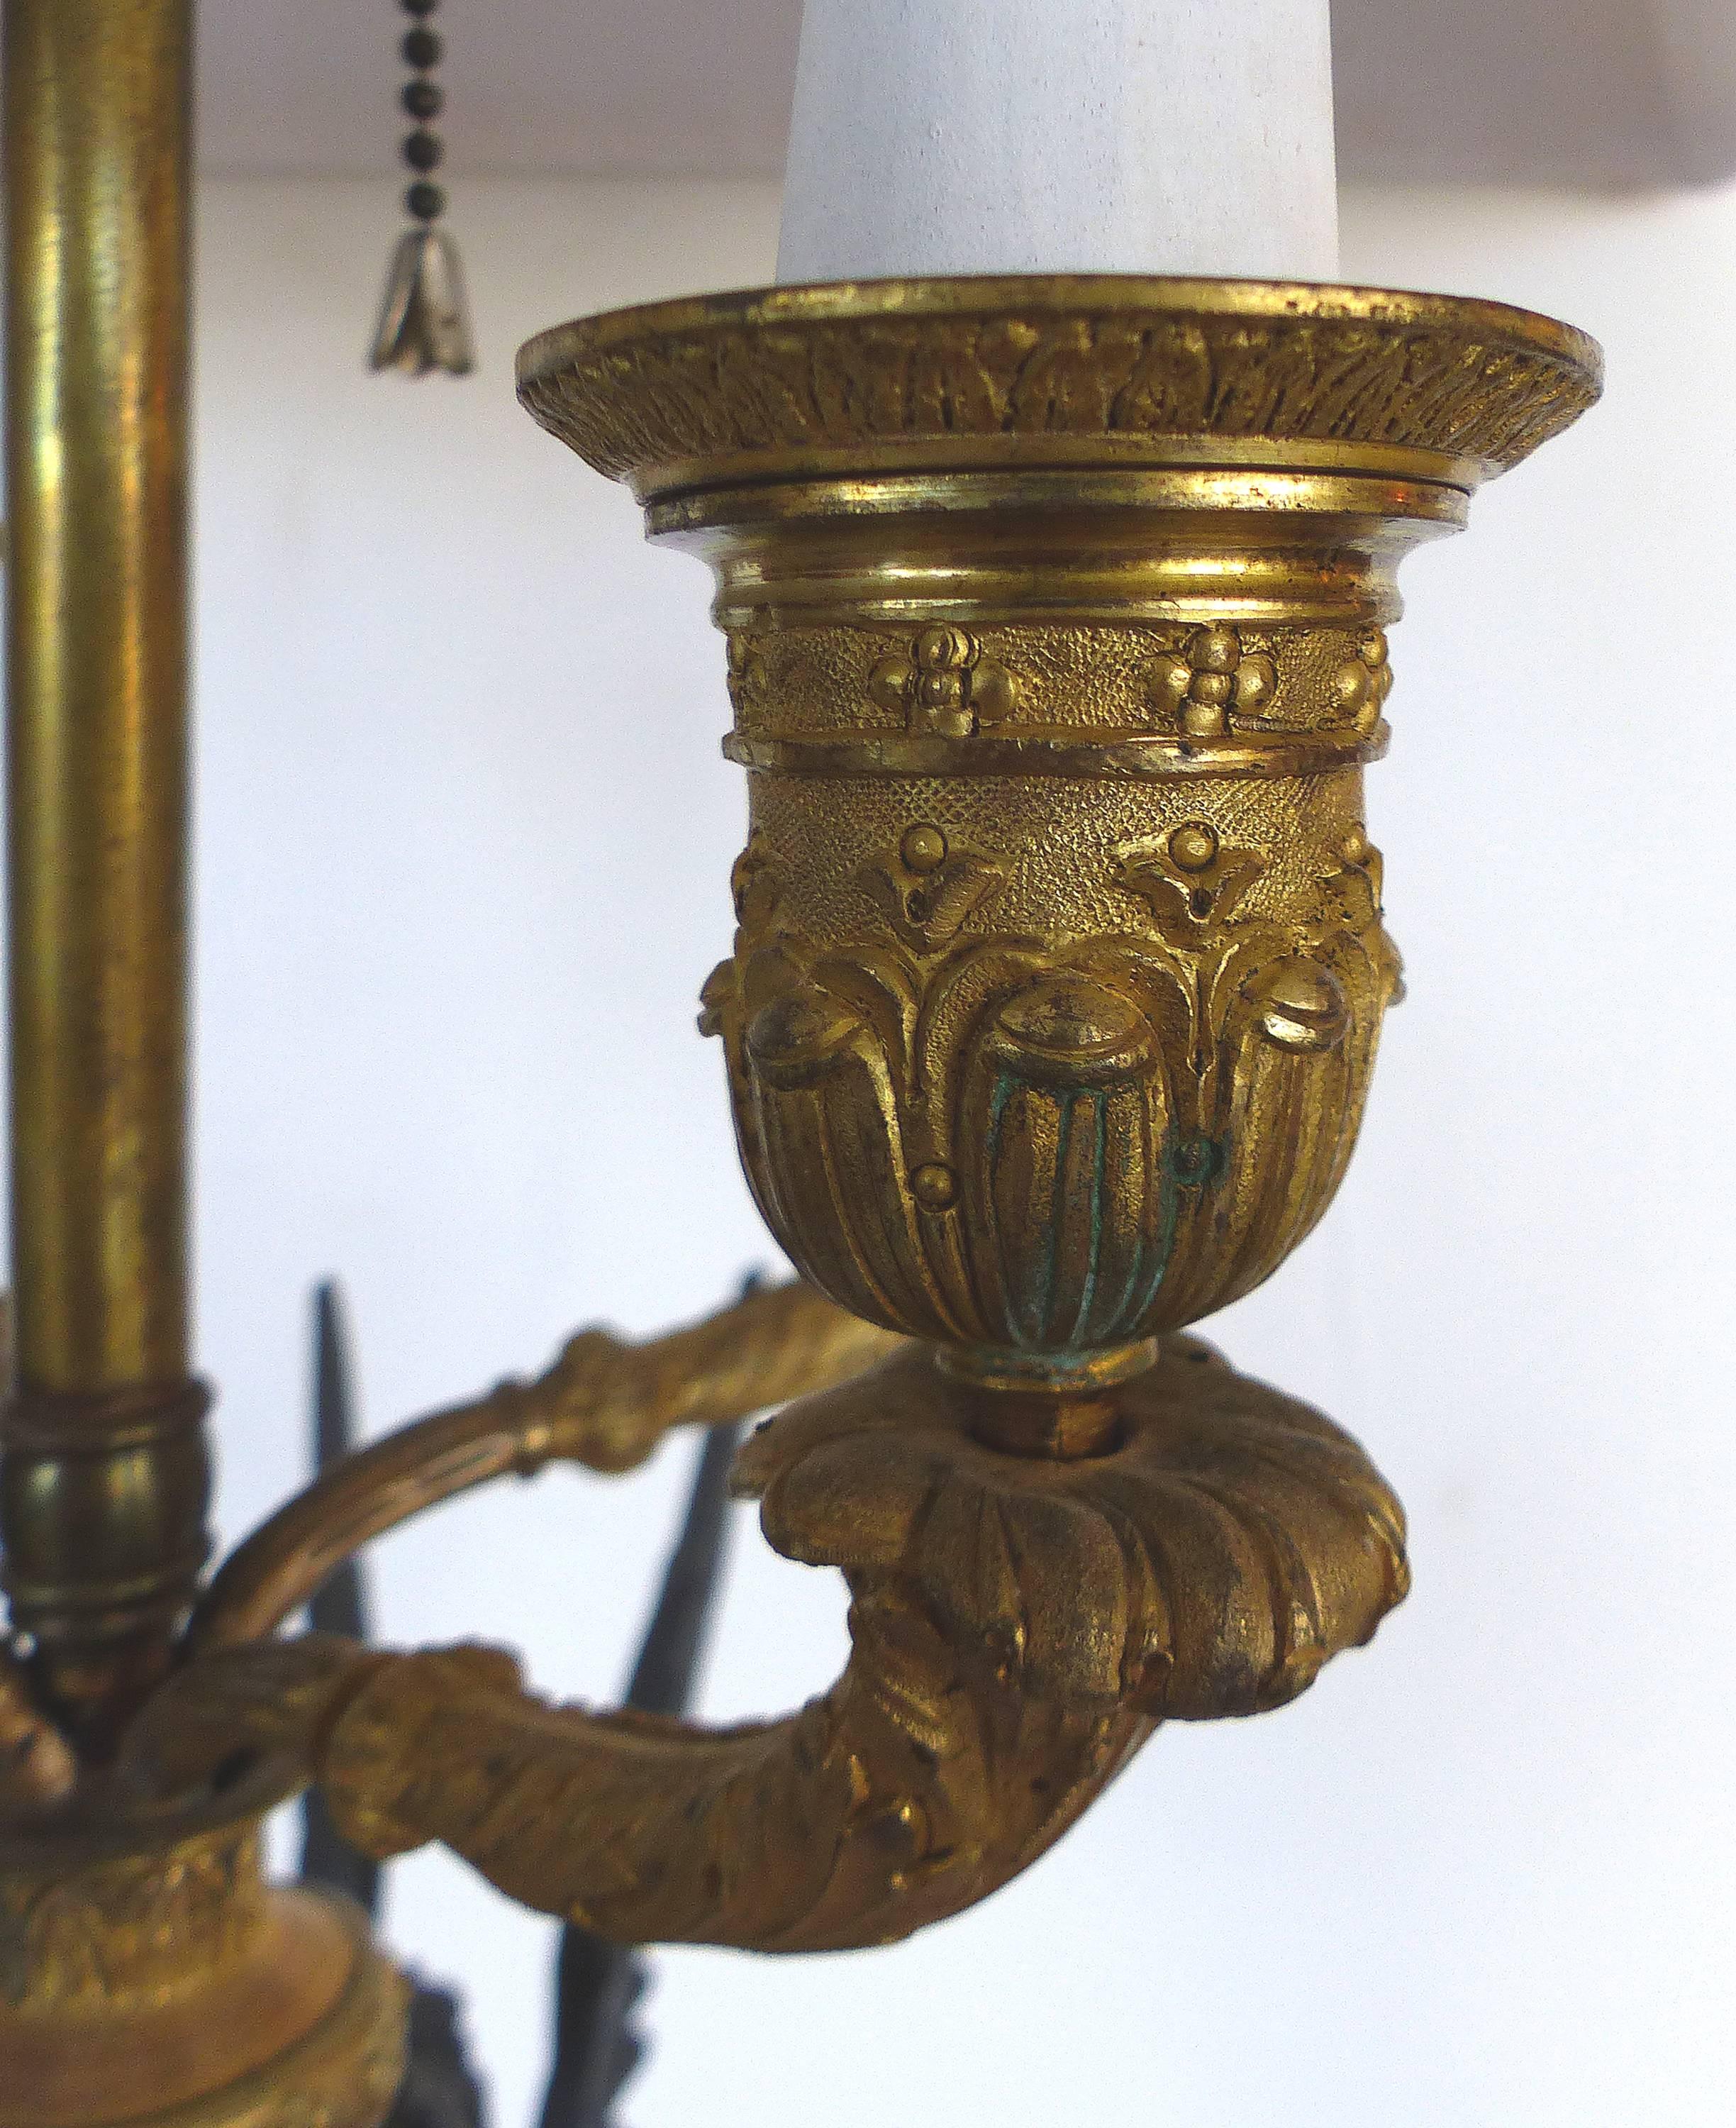 Fine French Empire 19th Century Bronze Candelabras Mounted as Lamps, Pair For Sale 5